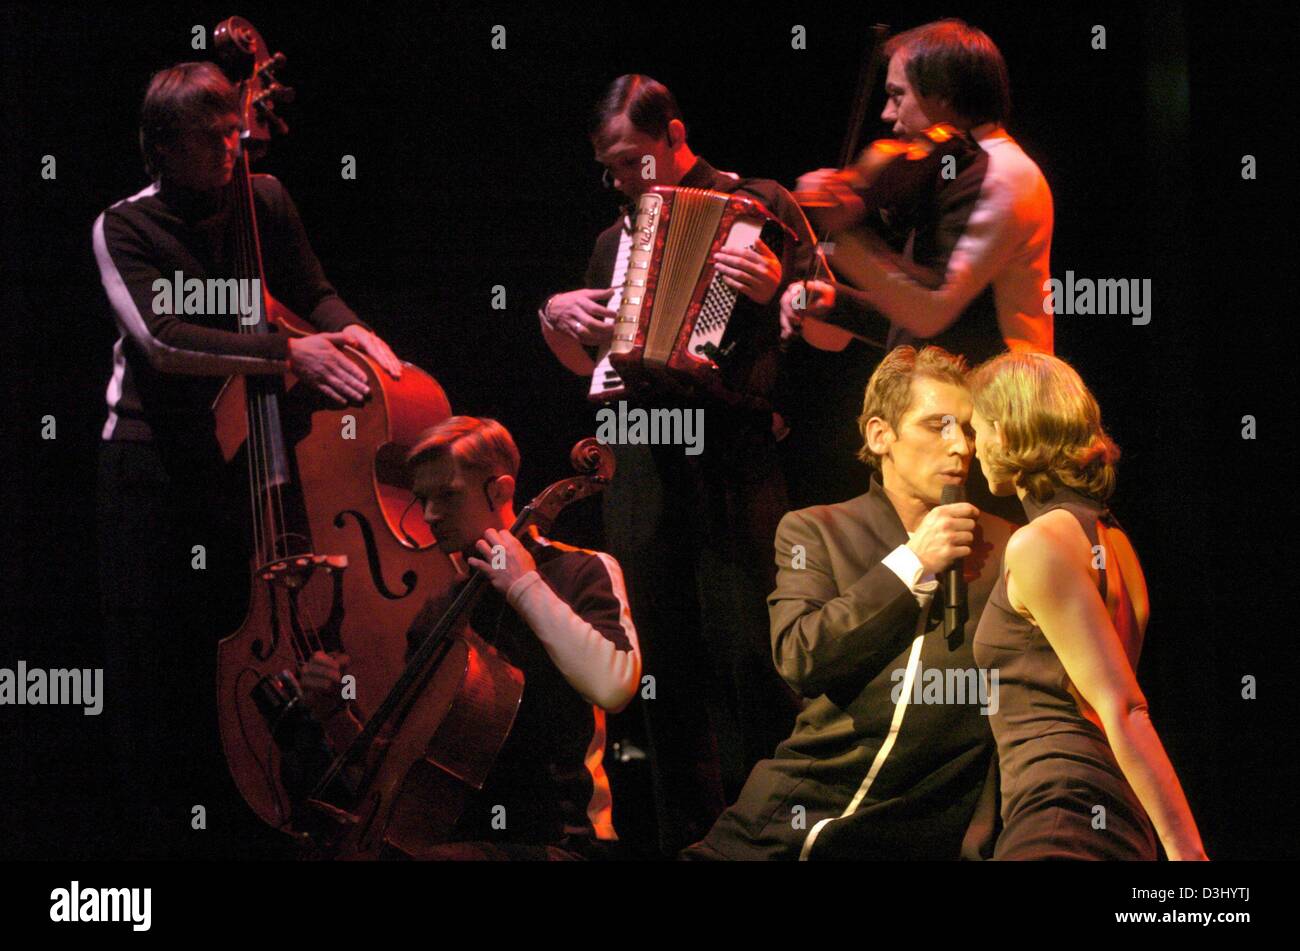 (dpa) - Wiebke Puls and Alexander Simon (front) perform during a rehearsal of the duett 'Mann trifft Frau' (man meets woman) at the Schauspielhaus theatre in Hamburg, 22 January 2004. The play comprises songs of Marvin Gaye, Bill Withers, Prince and Peter Gabriel. The play will premiere on 29 January 2004. Stock Photo